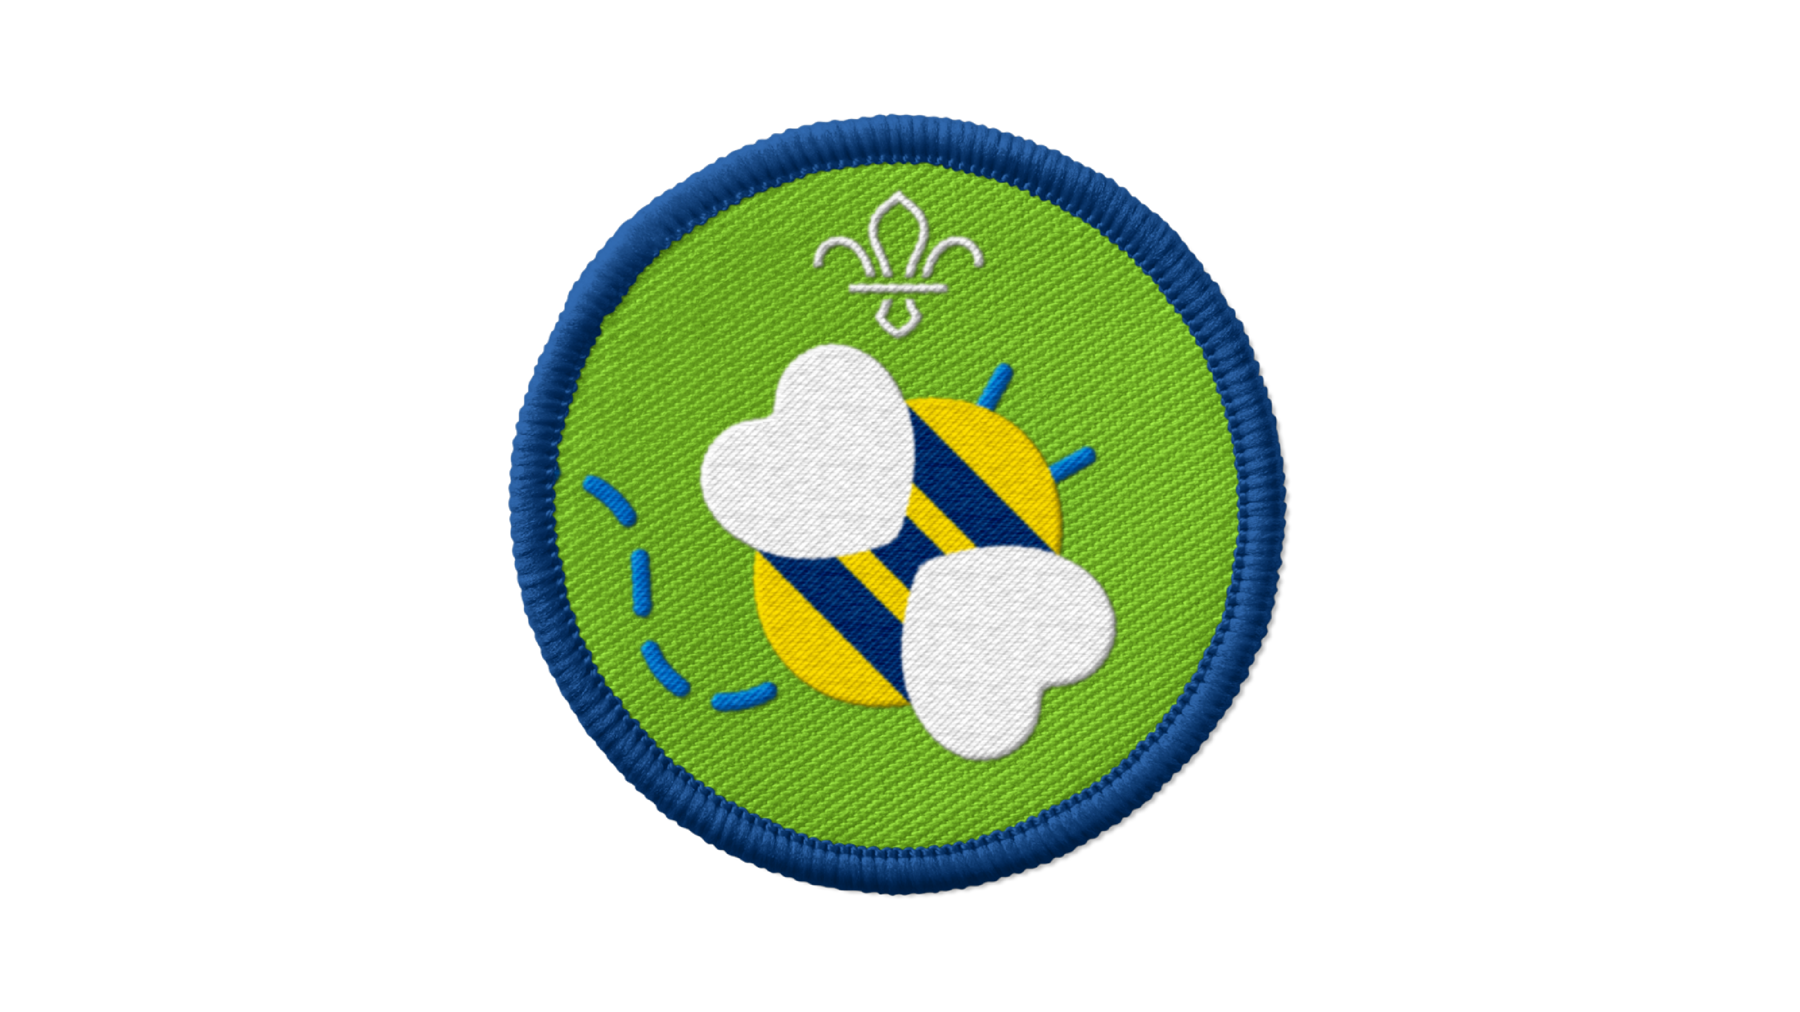 The badge image for the Squirrels Go Wild Activity Badge.